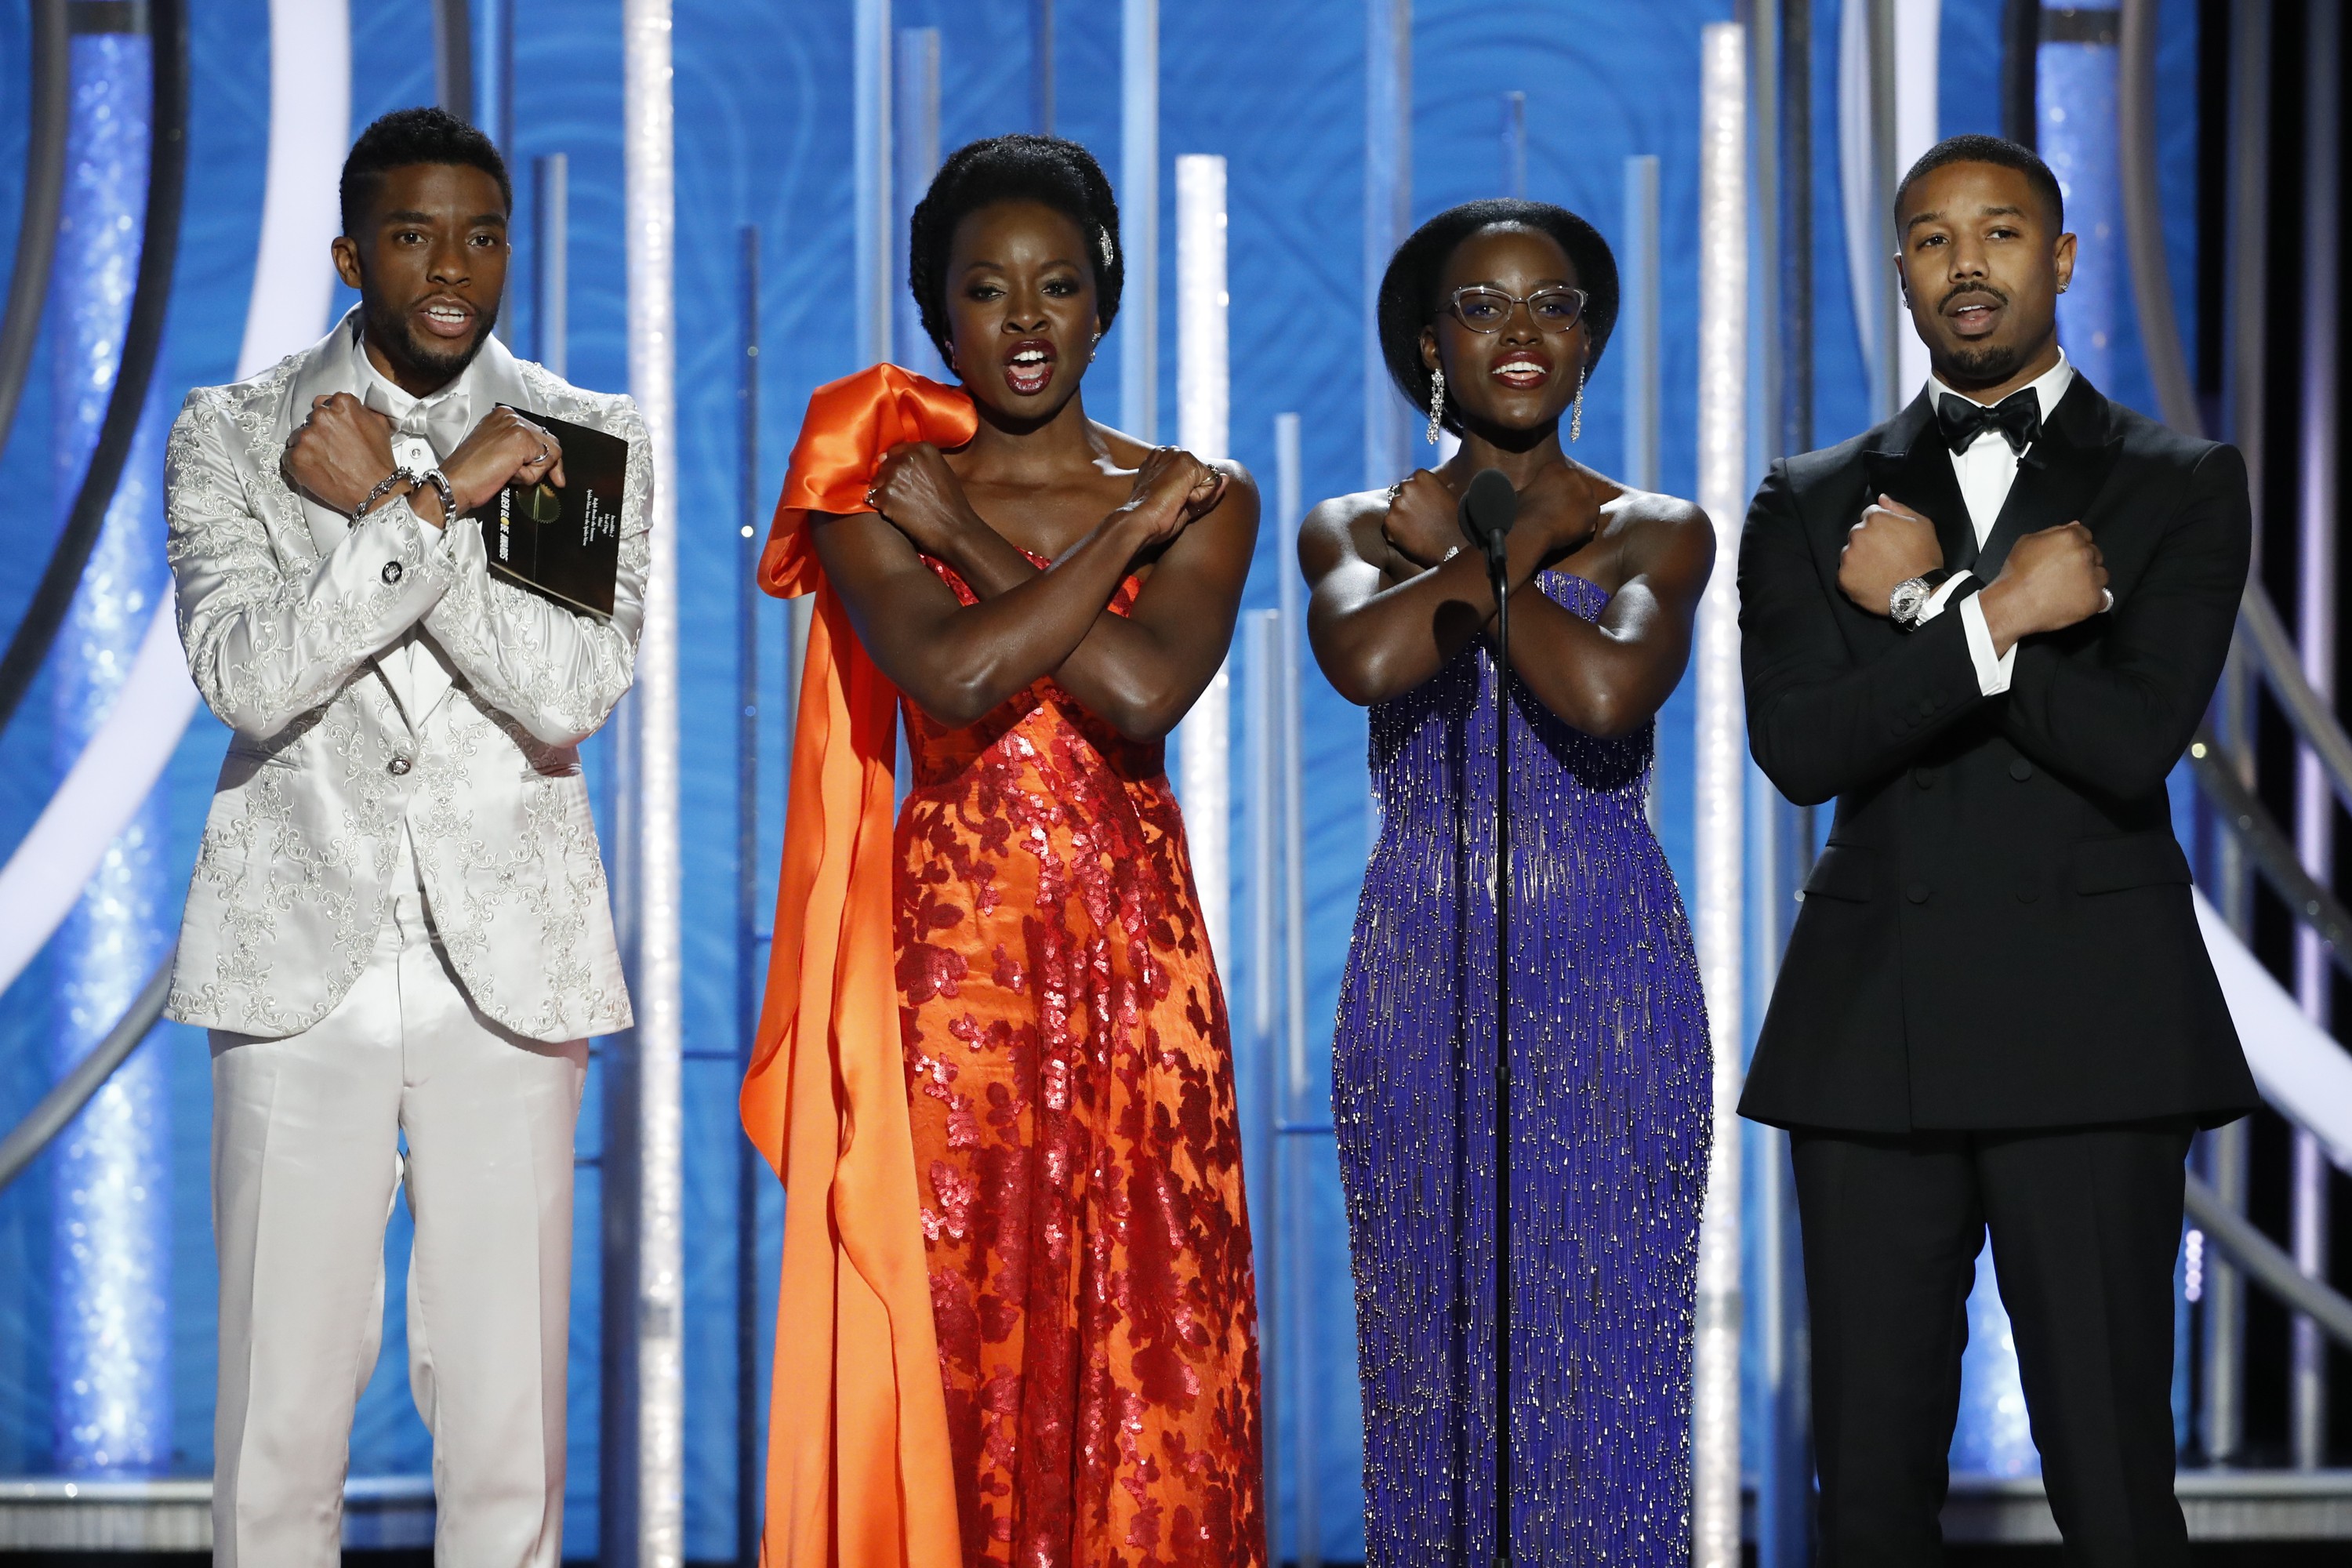 Members of the cast of ‘Black Panther’, (from left) Chadwick Boseman, Danai Gurira, Lupita Nyong’o and Michael B. Jordan – pictured at this month’s Golden Globe Awards ceremony – which has been nominated for the best picture award at next month’s Academy Awards. Photo: NBC/AP